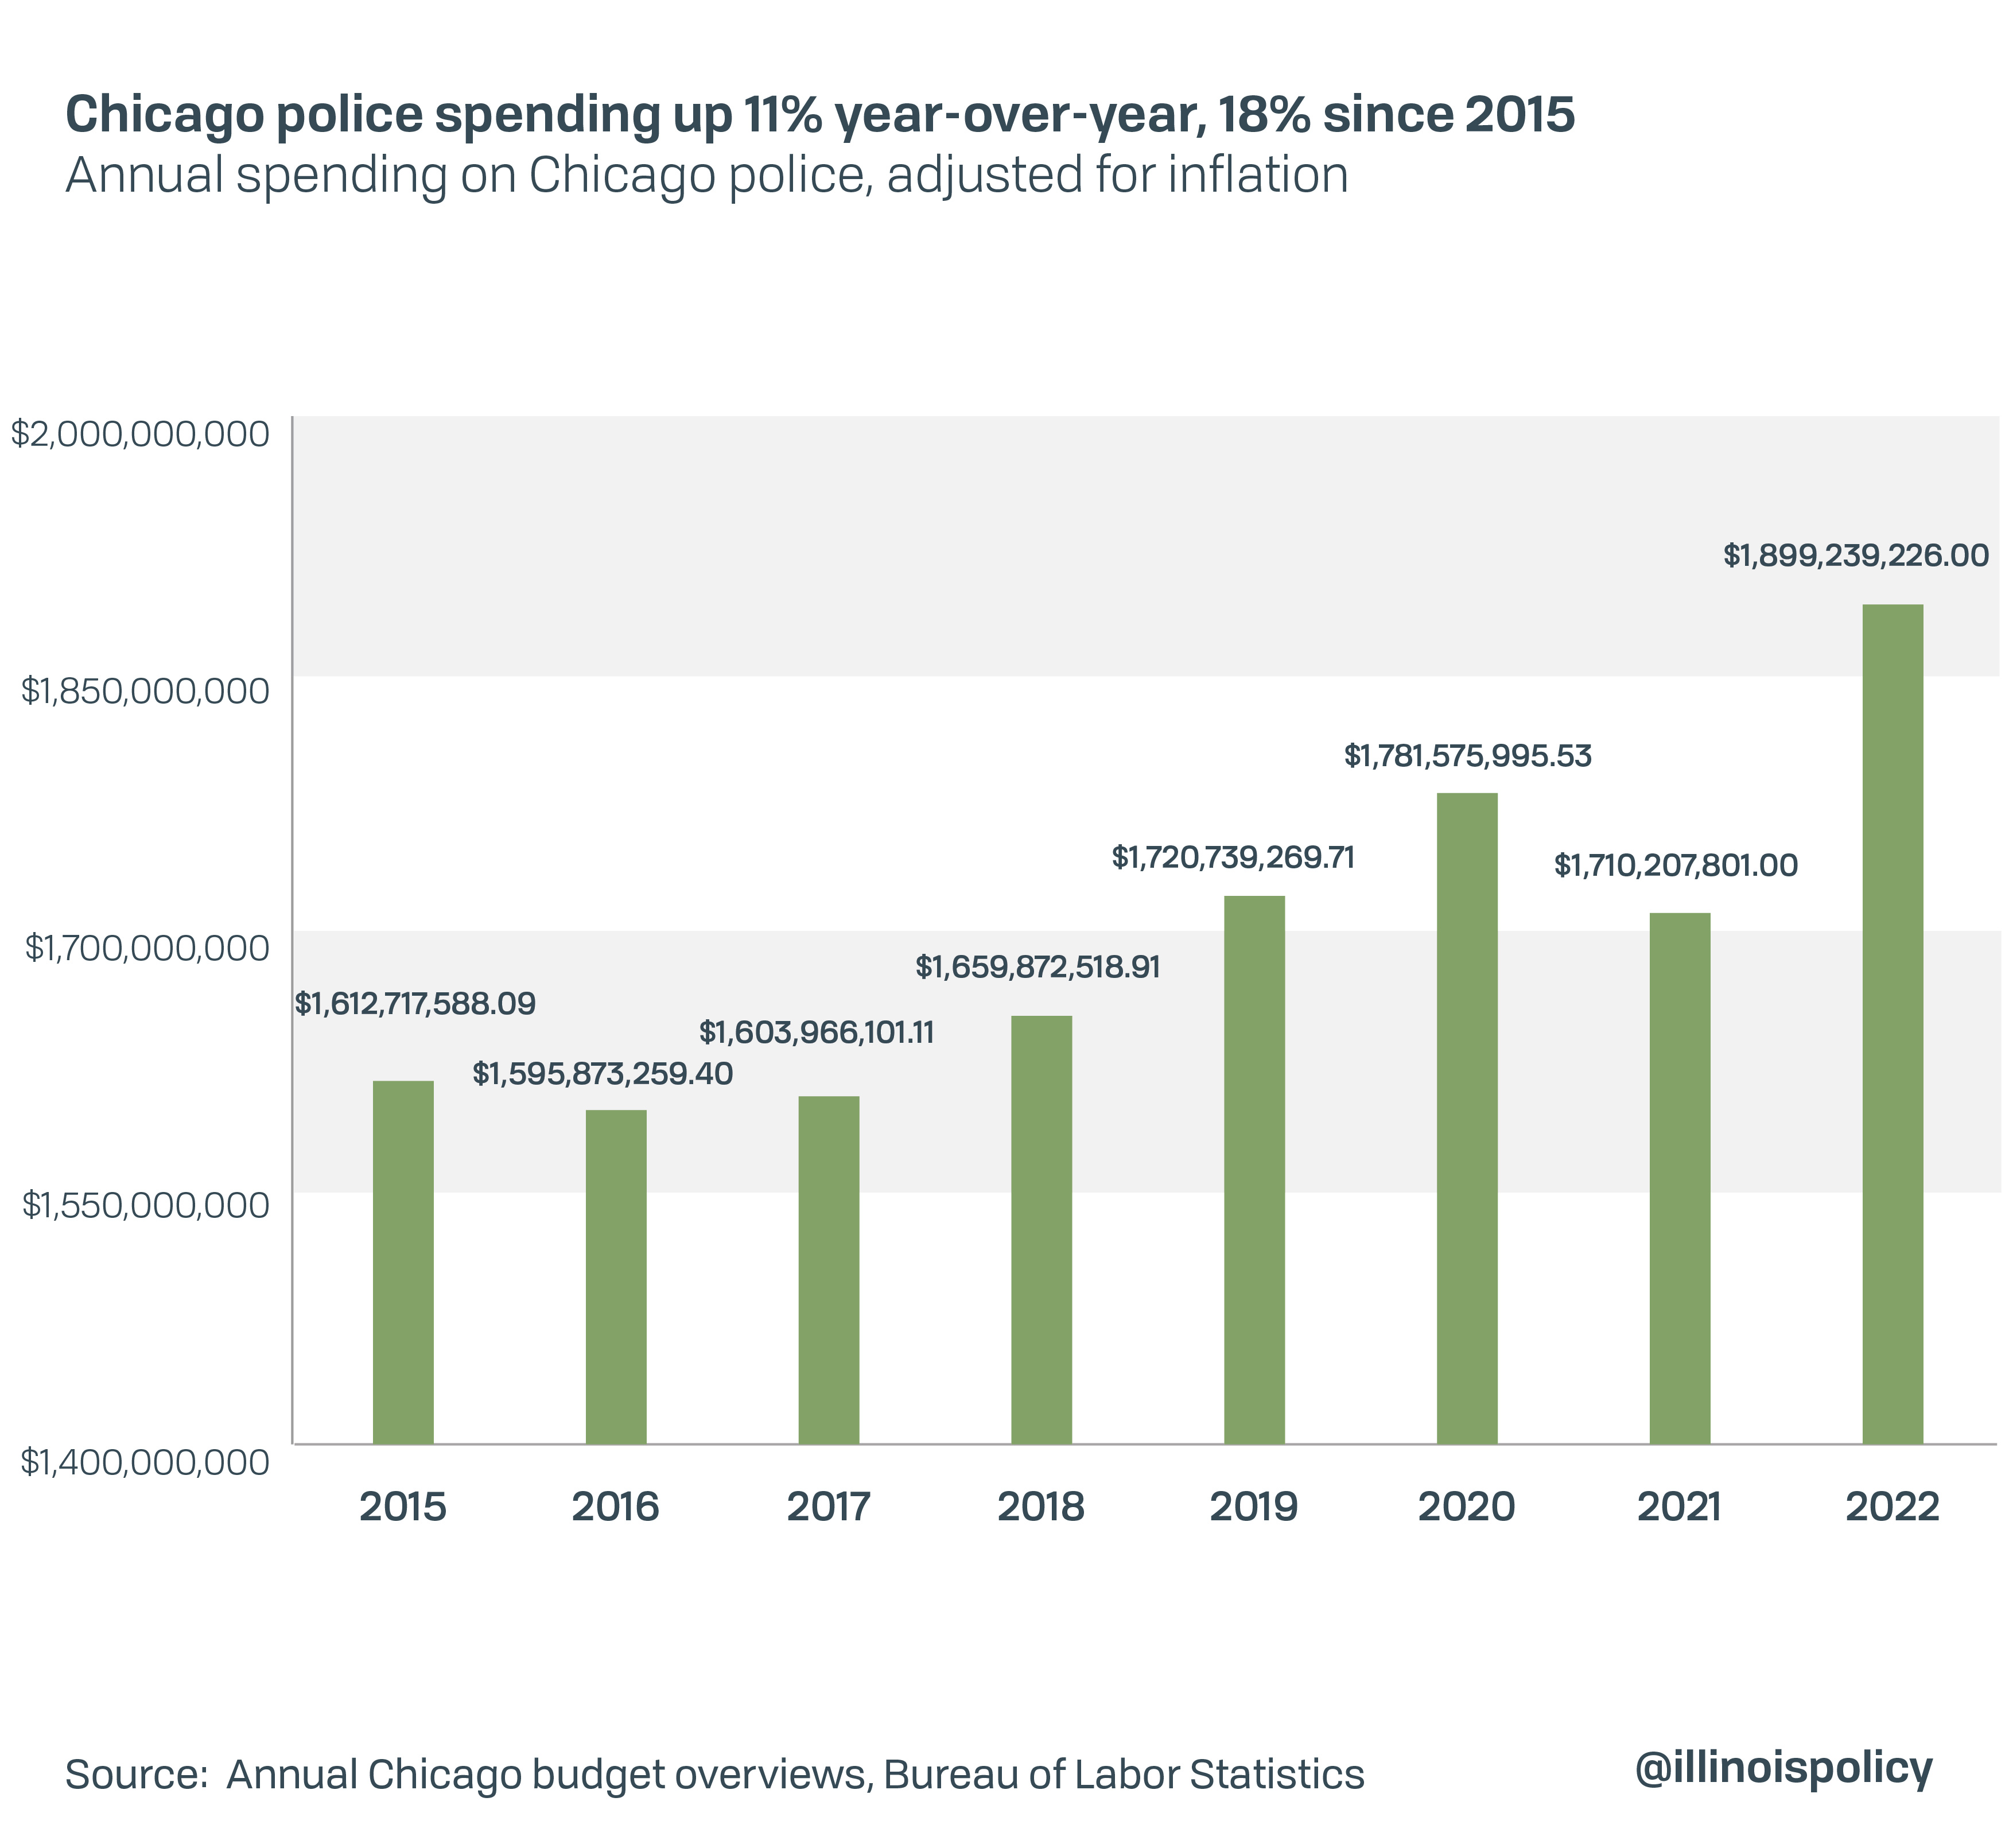 Chicago police spending up 11% year-over-year, 18% since 2015